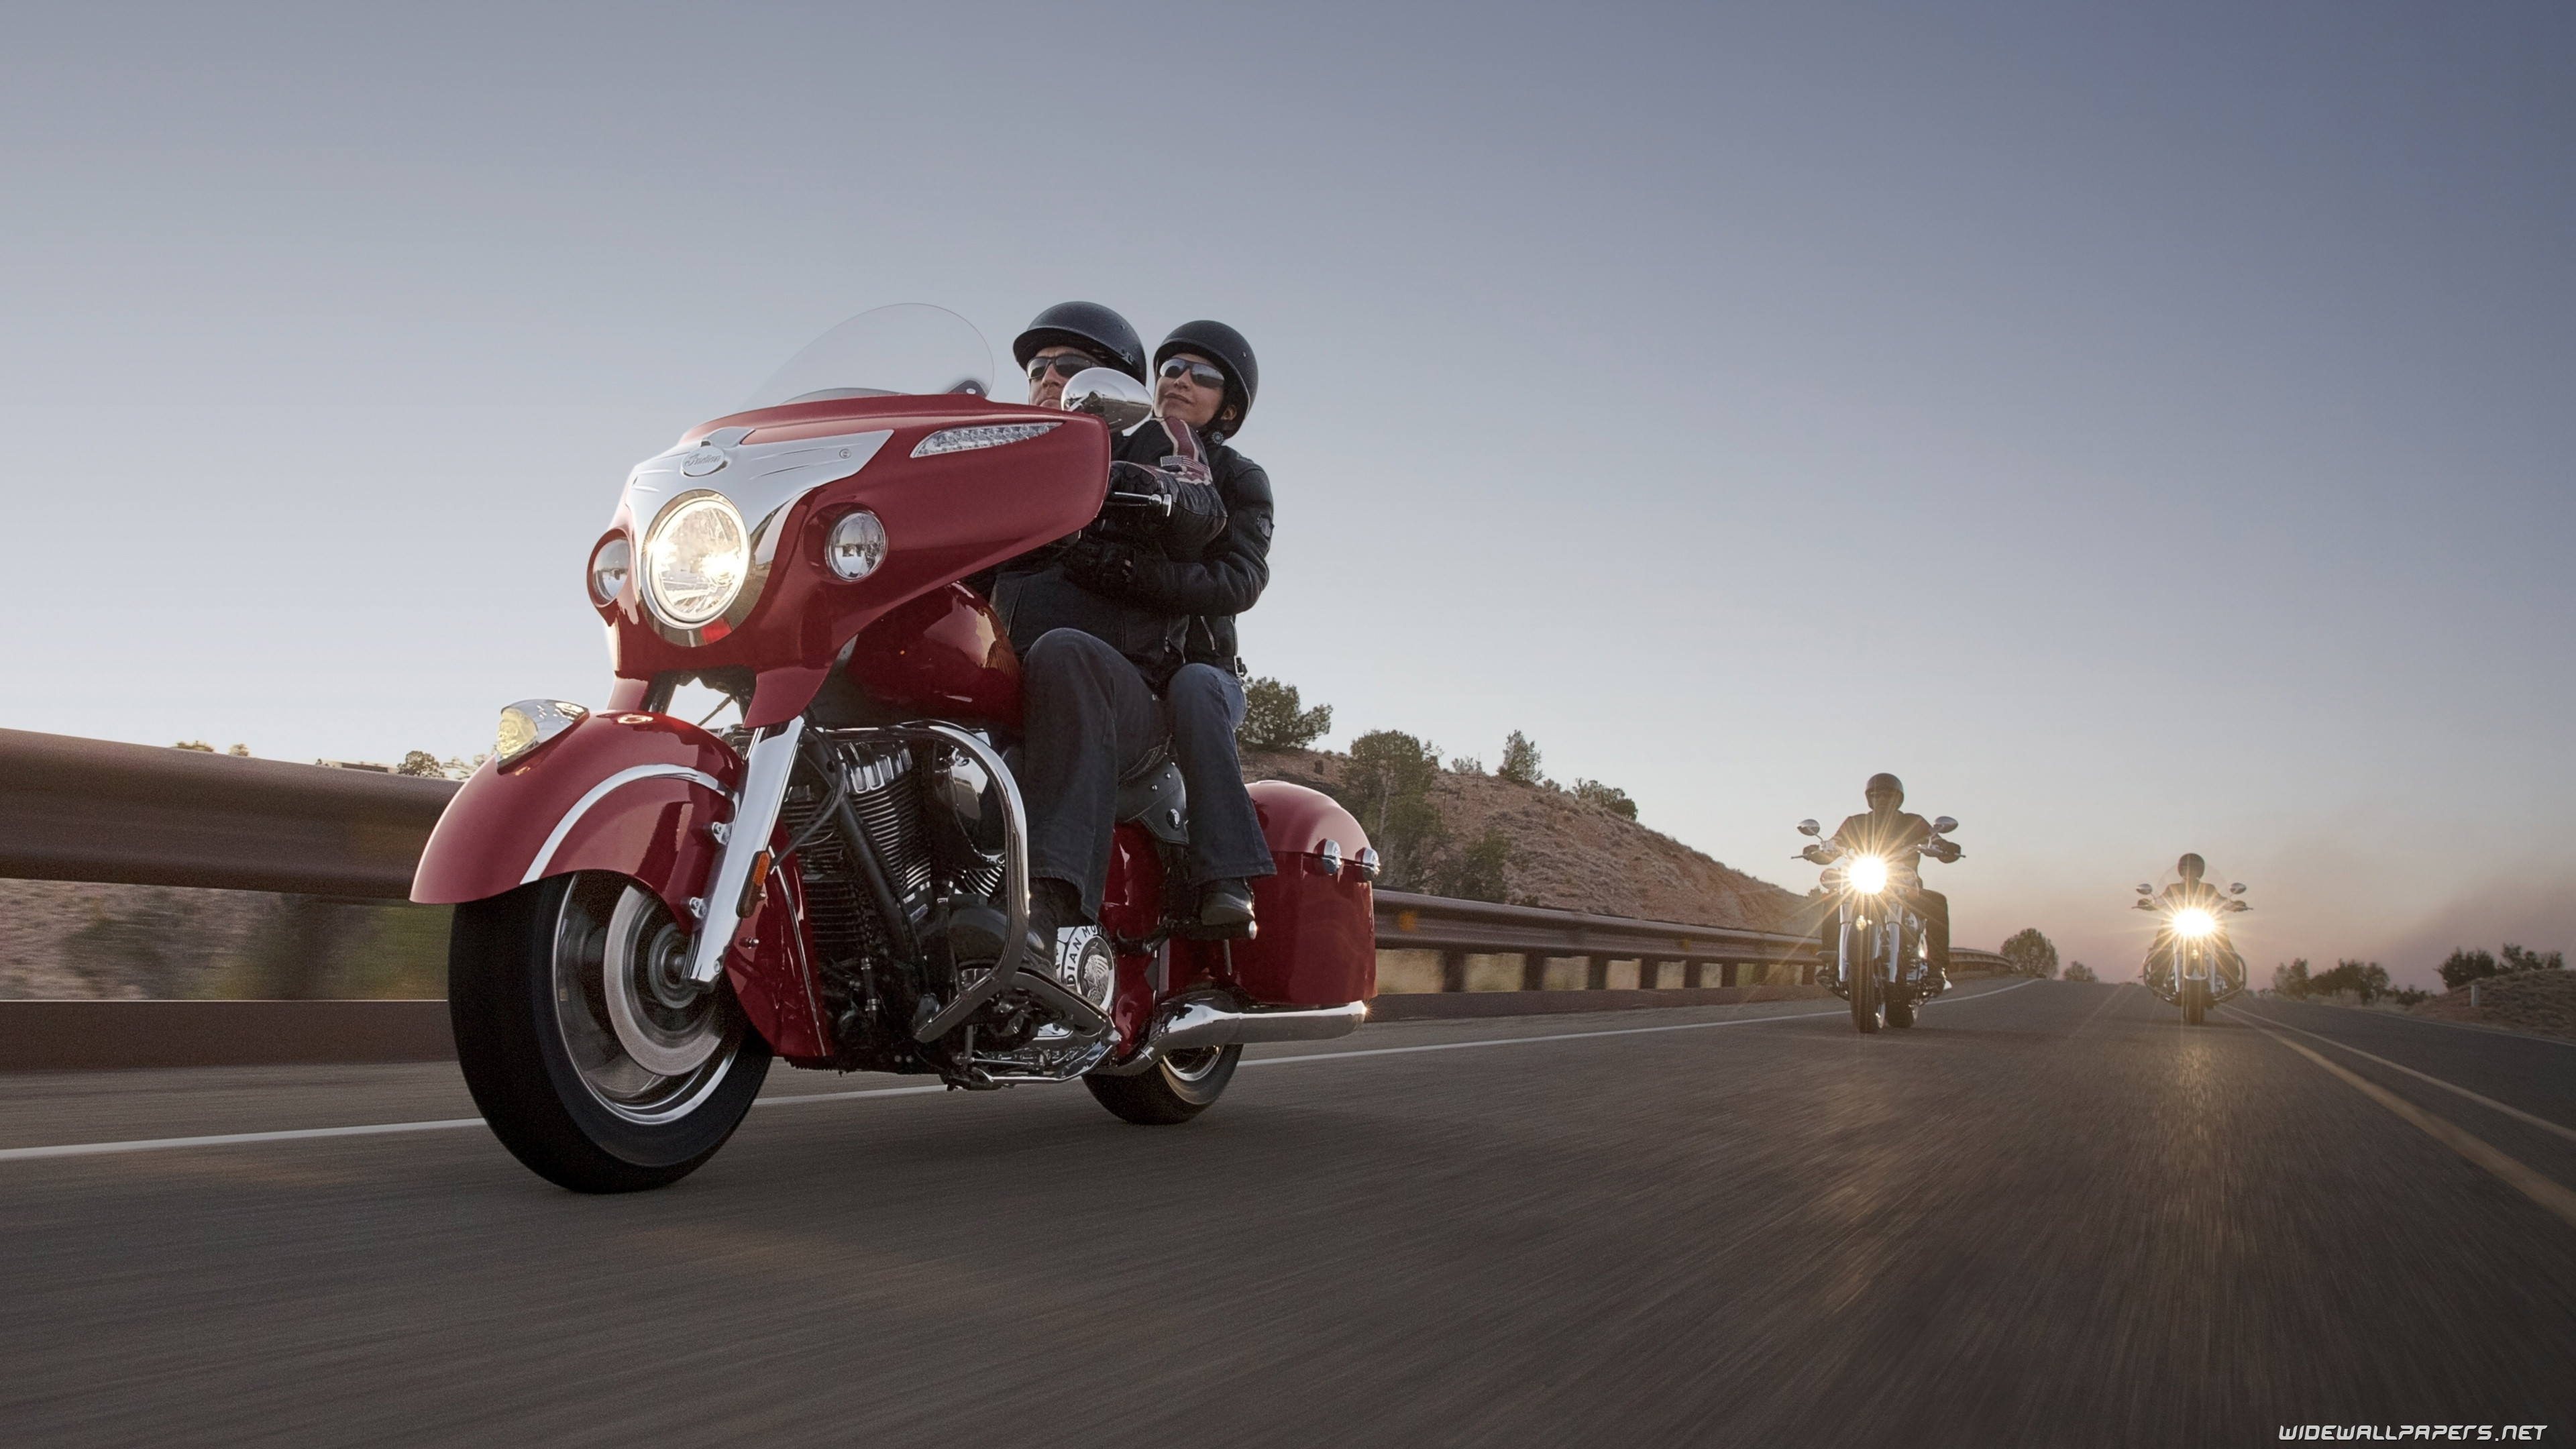 3840x2160 Indian Motorcycle Wallpapers, Adorable HDQ Backgrounds of Indian  Motorcycle, 